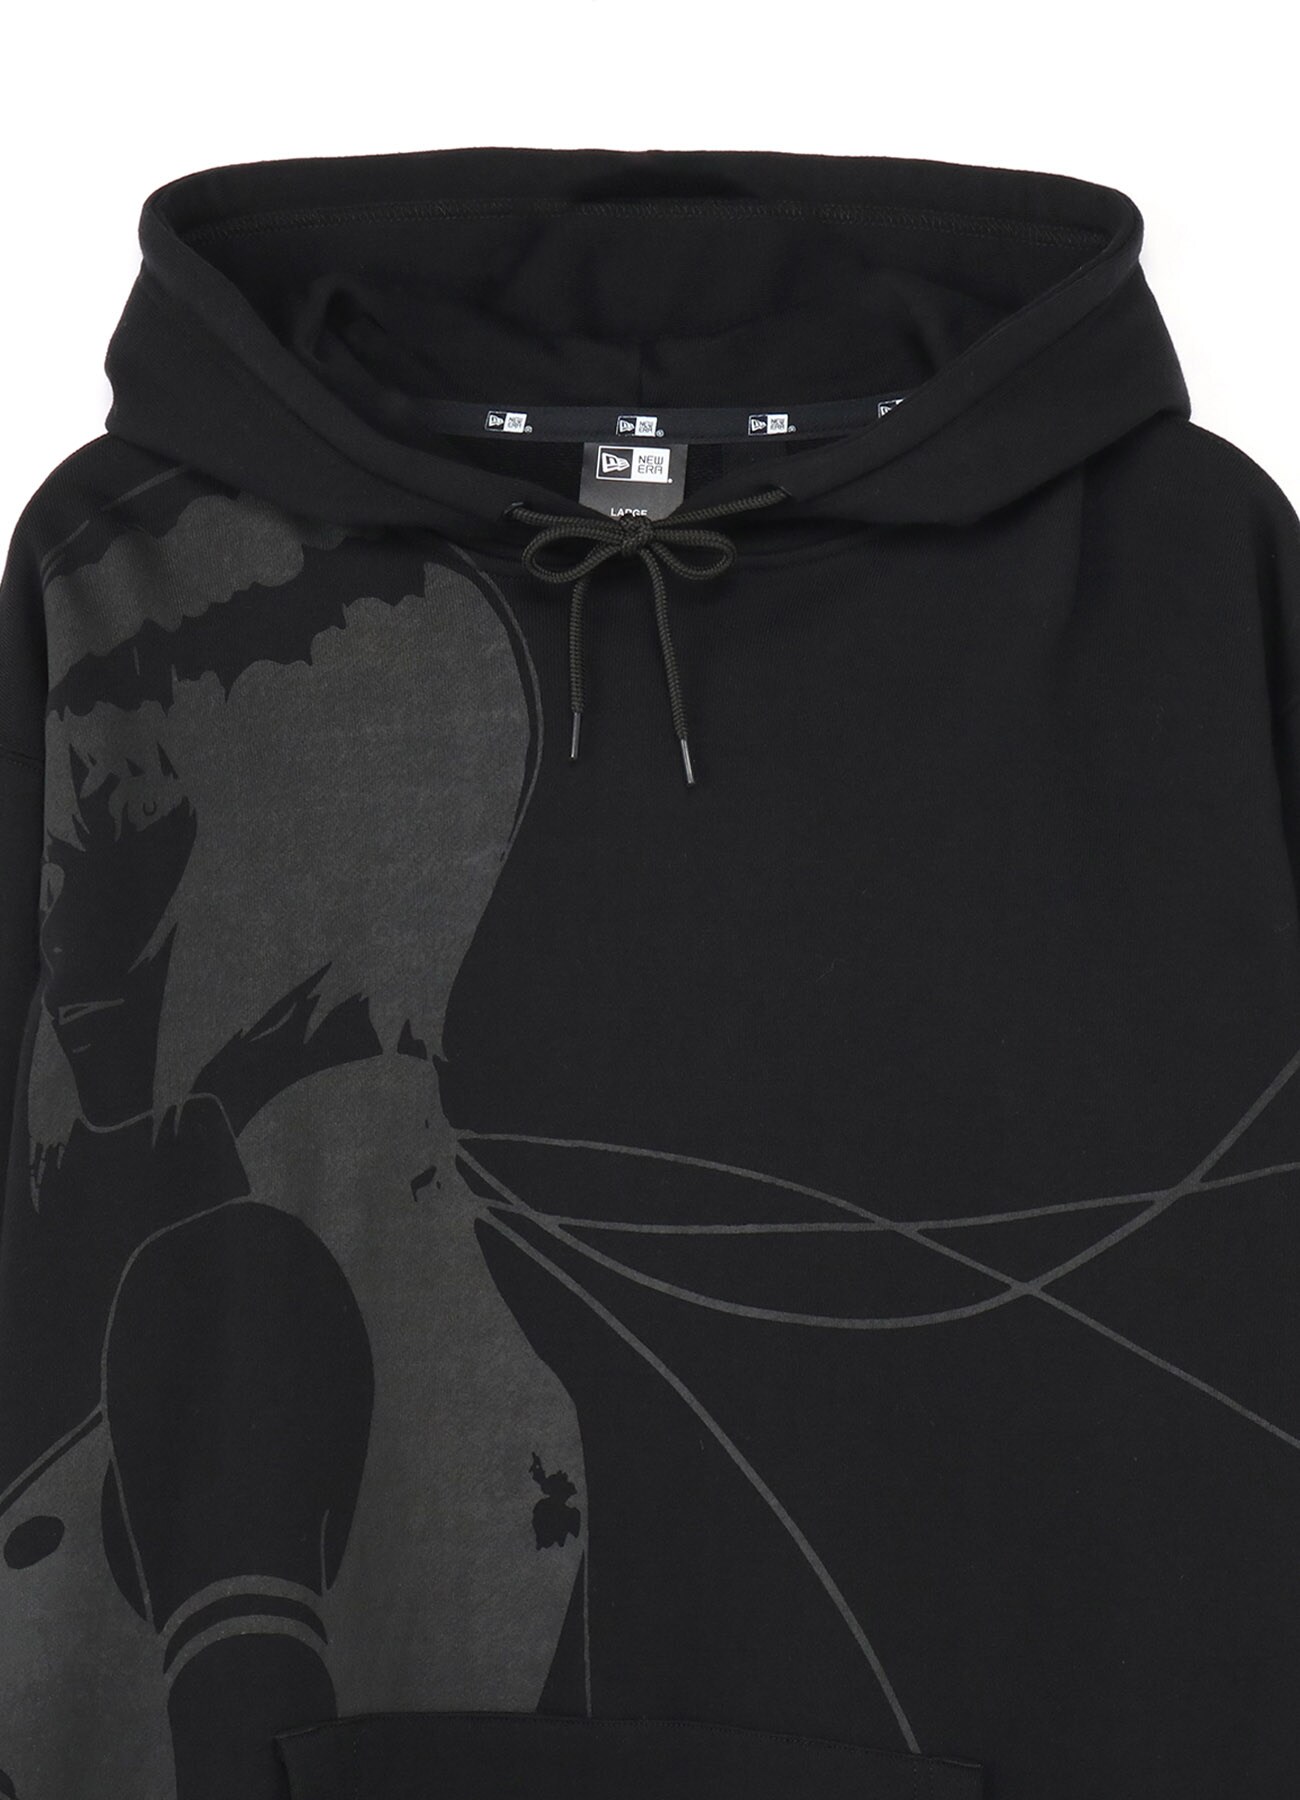 Ground Y×NEW ERA×GHOST IN THE SHELL Pull Over Hoodie